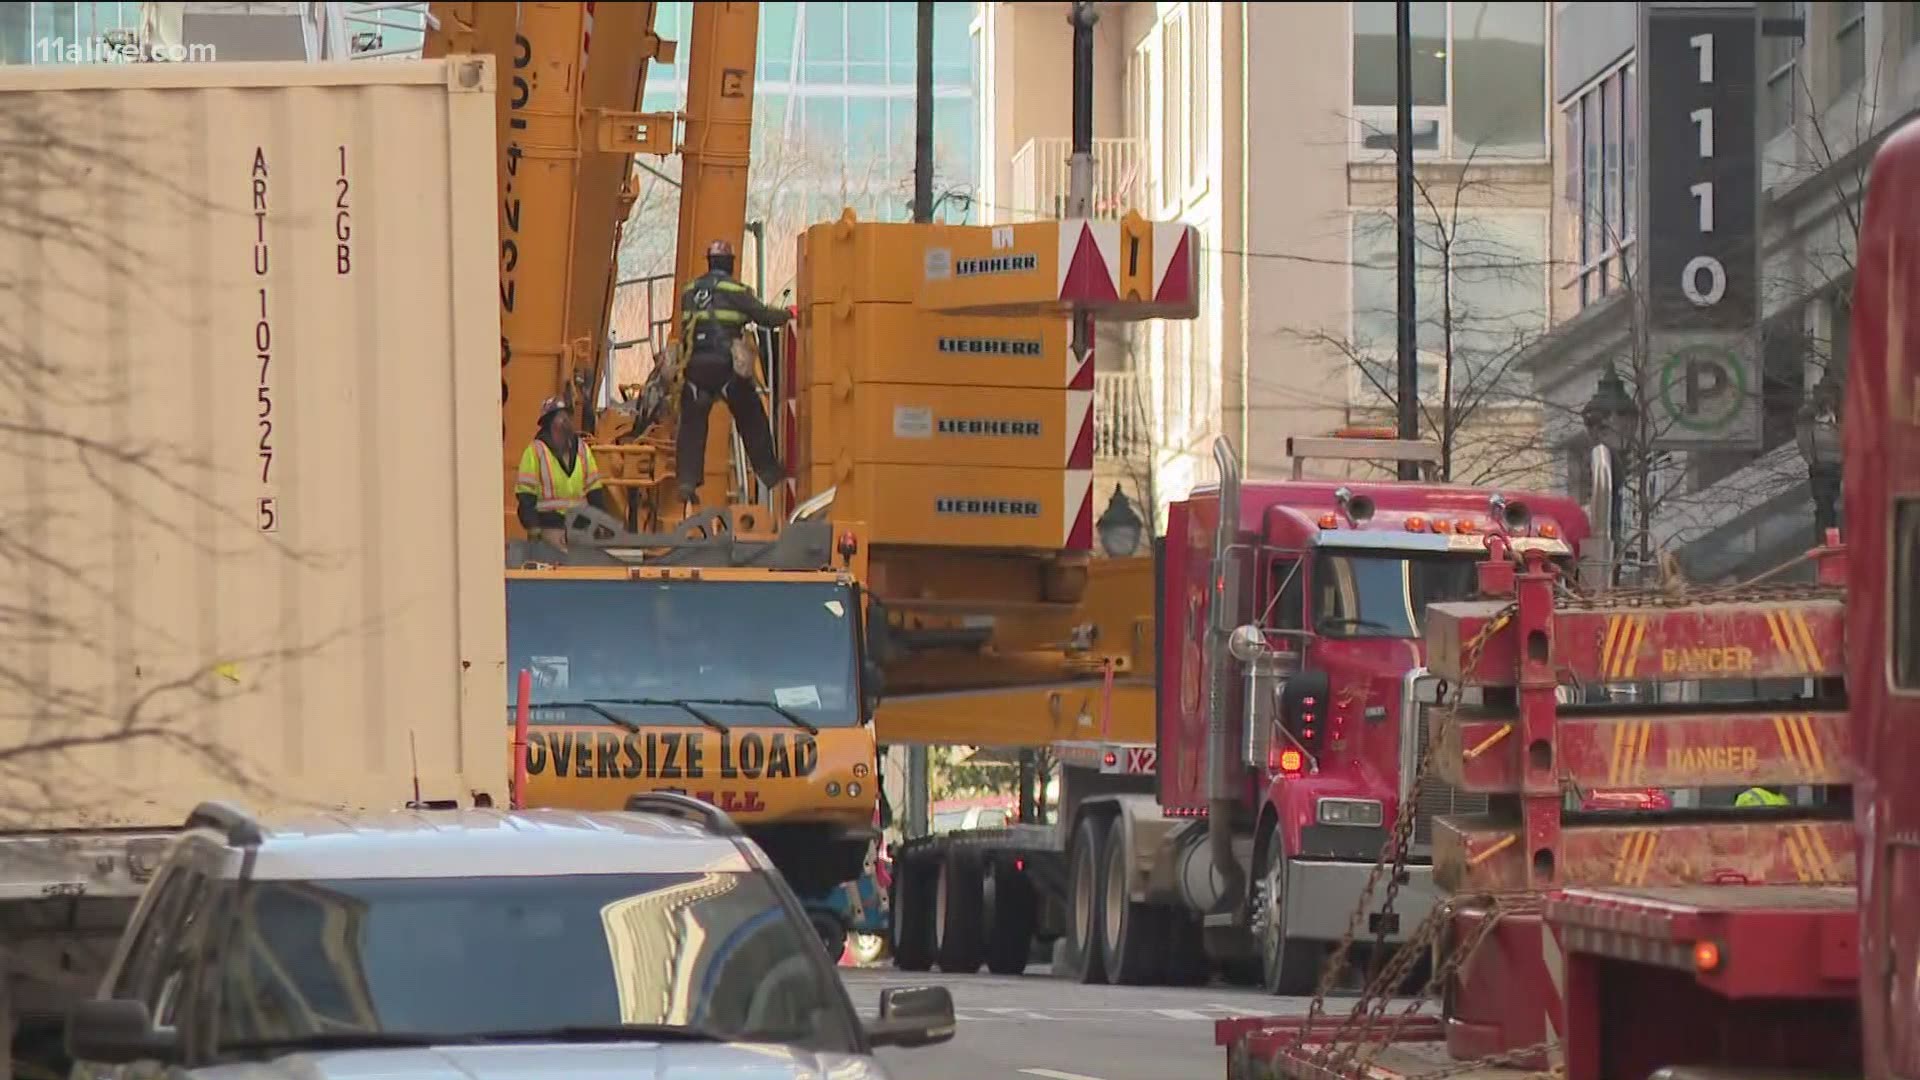 The crane is leaning right into a building located at 13th and West Peachtree Street, which is currently shut down.